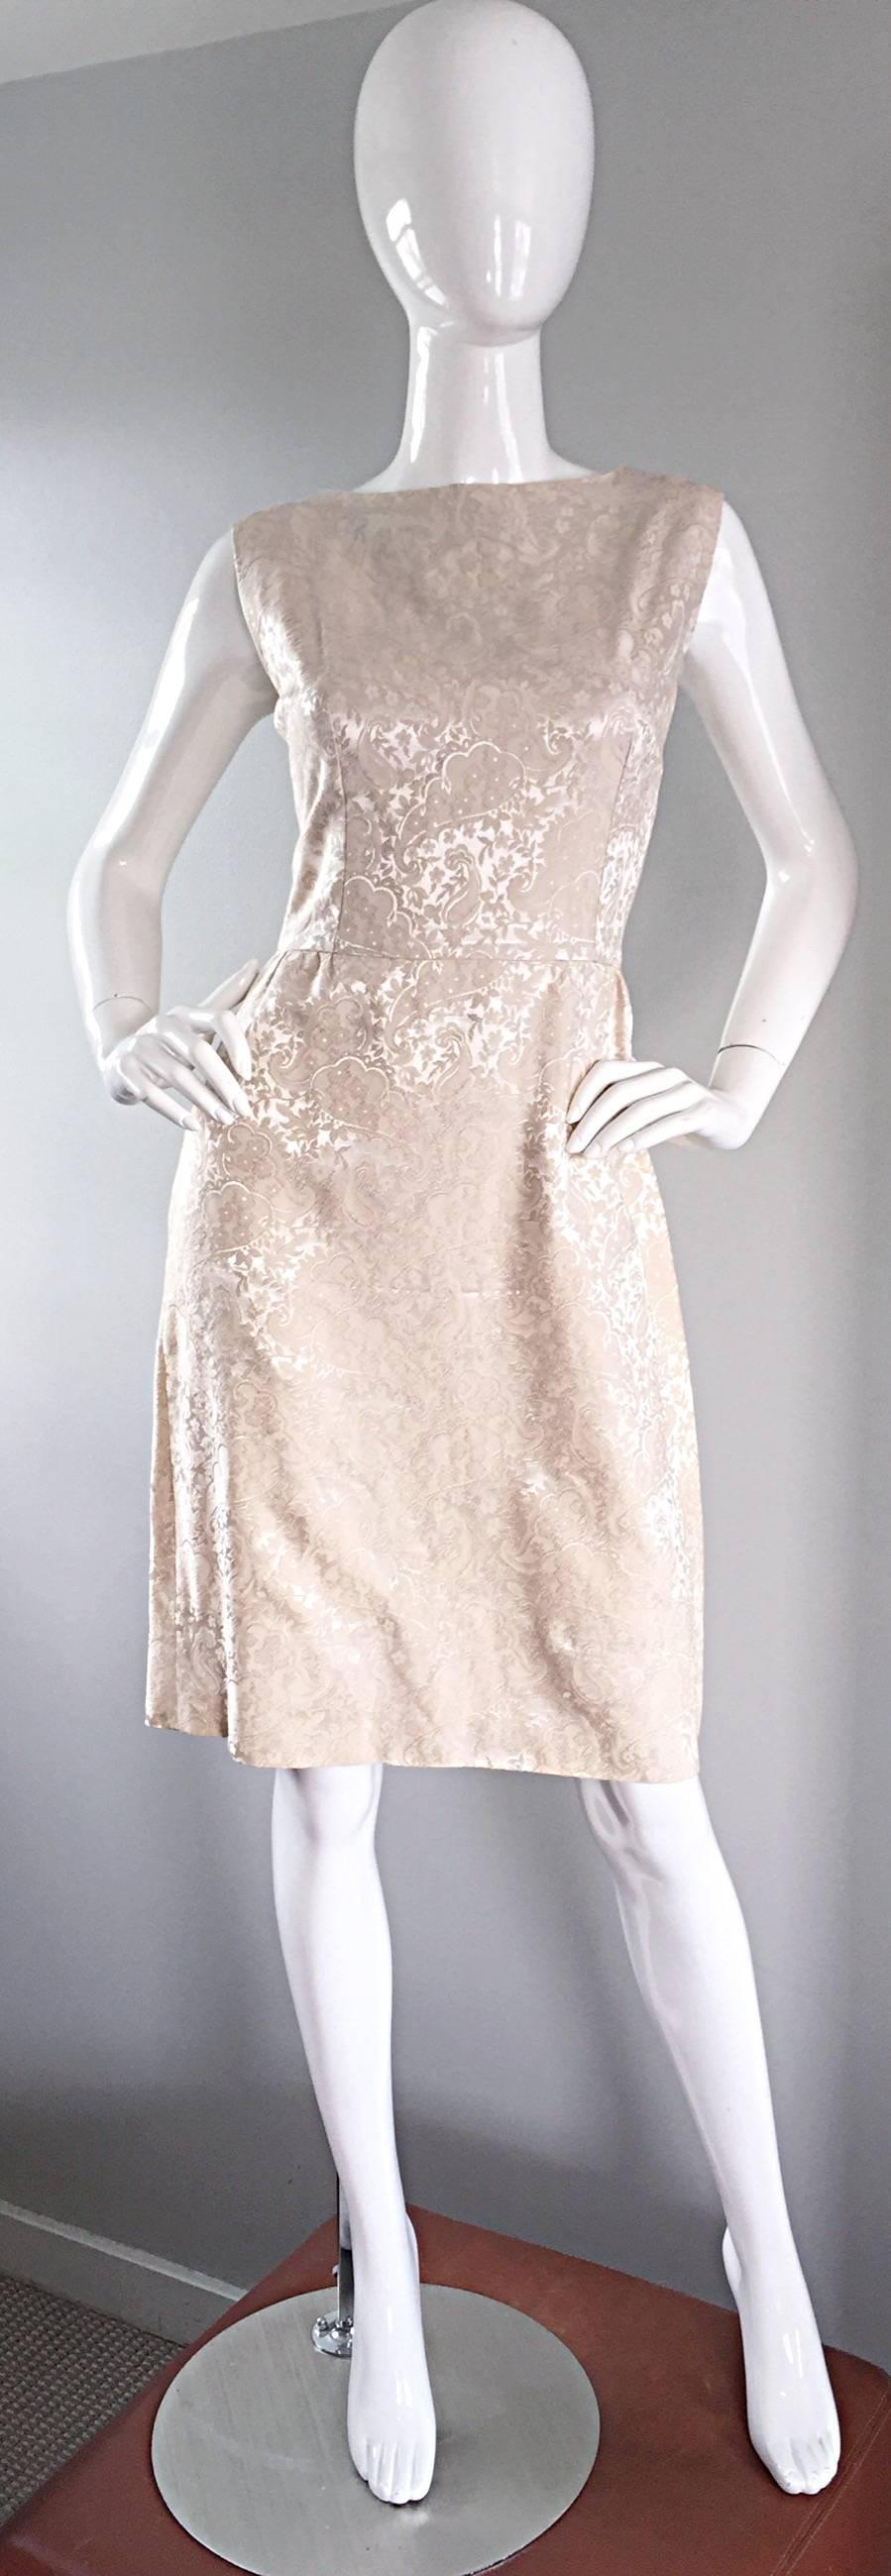 Chic 1960s ivory iridescent silk dress! Flattering fit, with a slight A-line shape. Dates to the early 60s, following the 1950s trend of full skirts. Wonderfully tailored, with heavy attention to detail. Silk on silk print of a light paisley